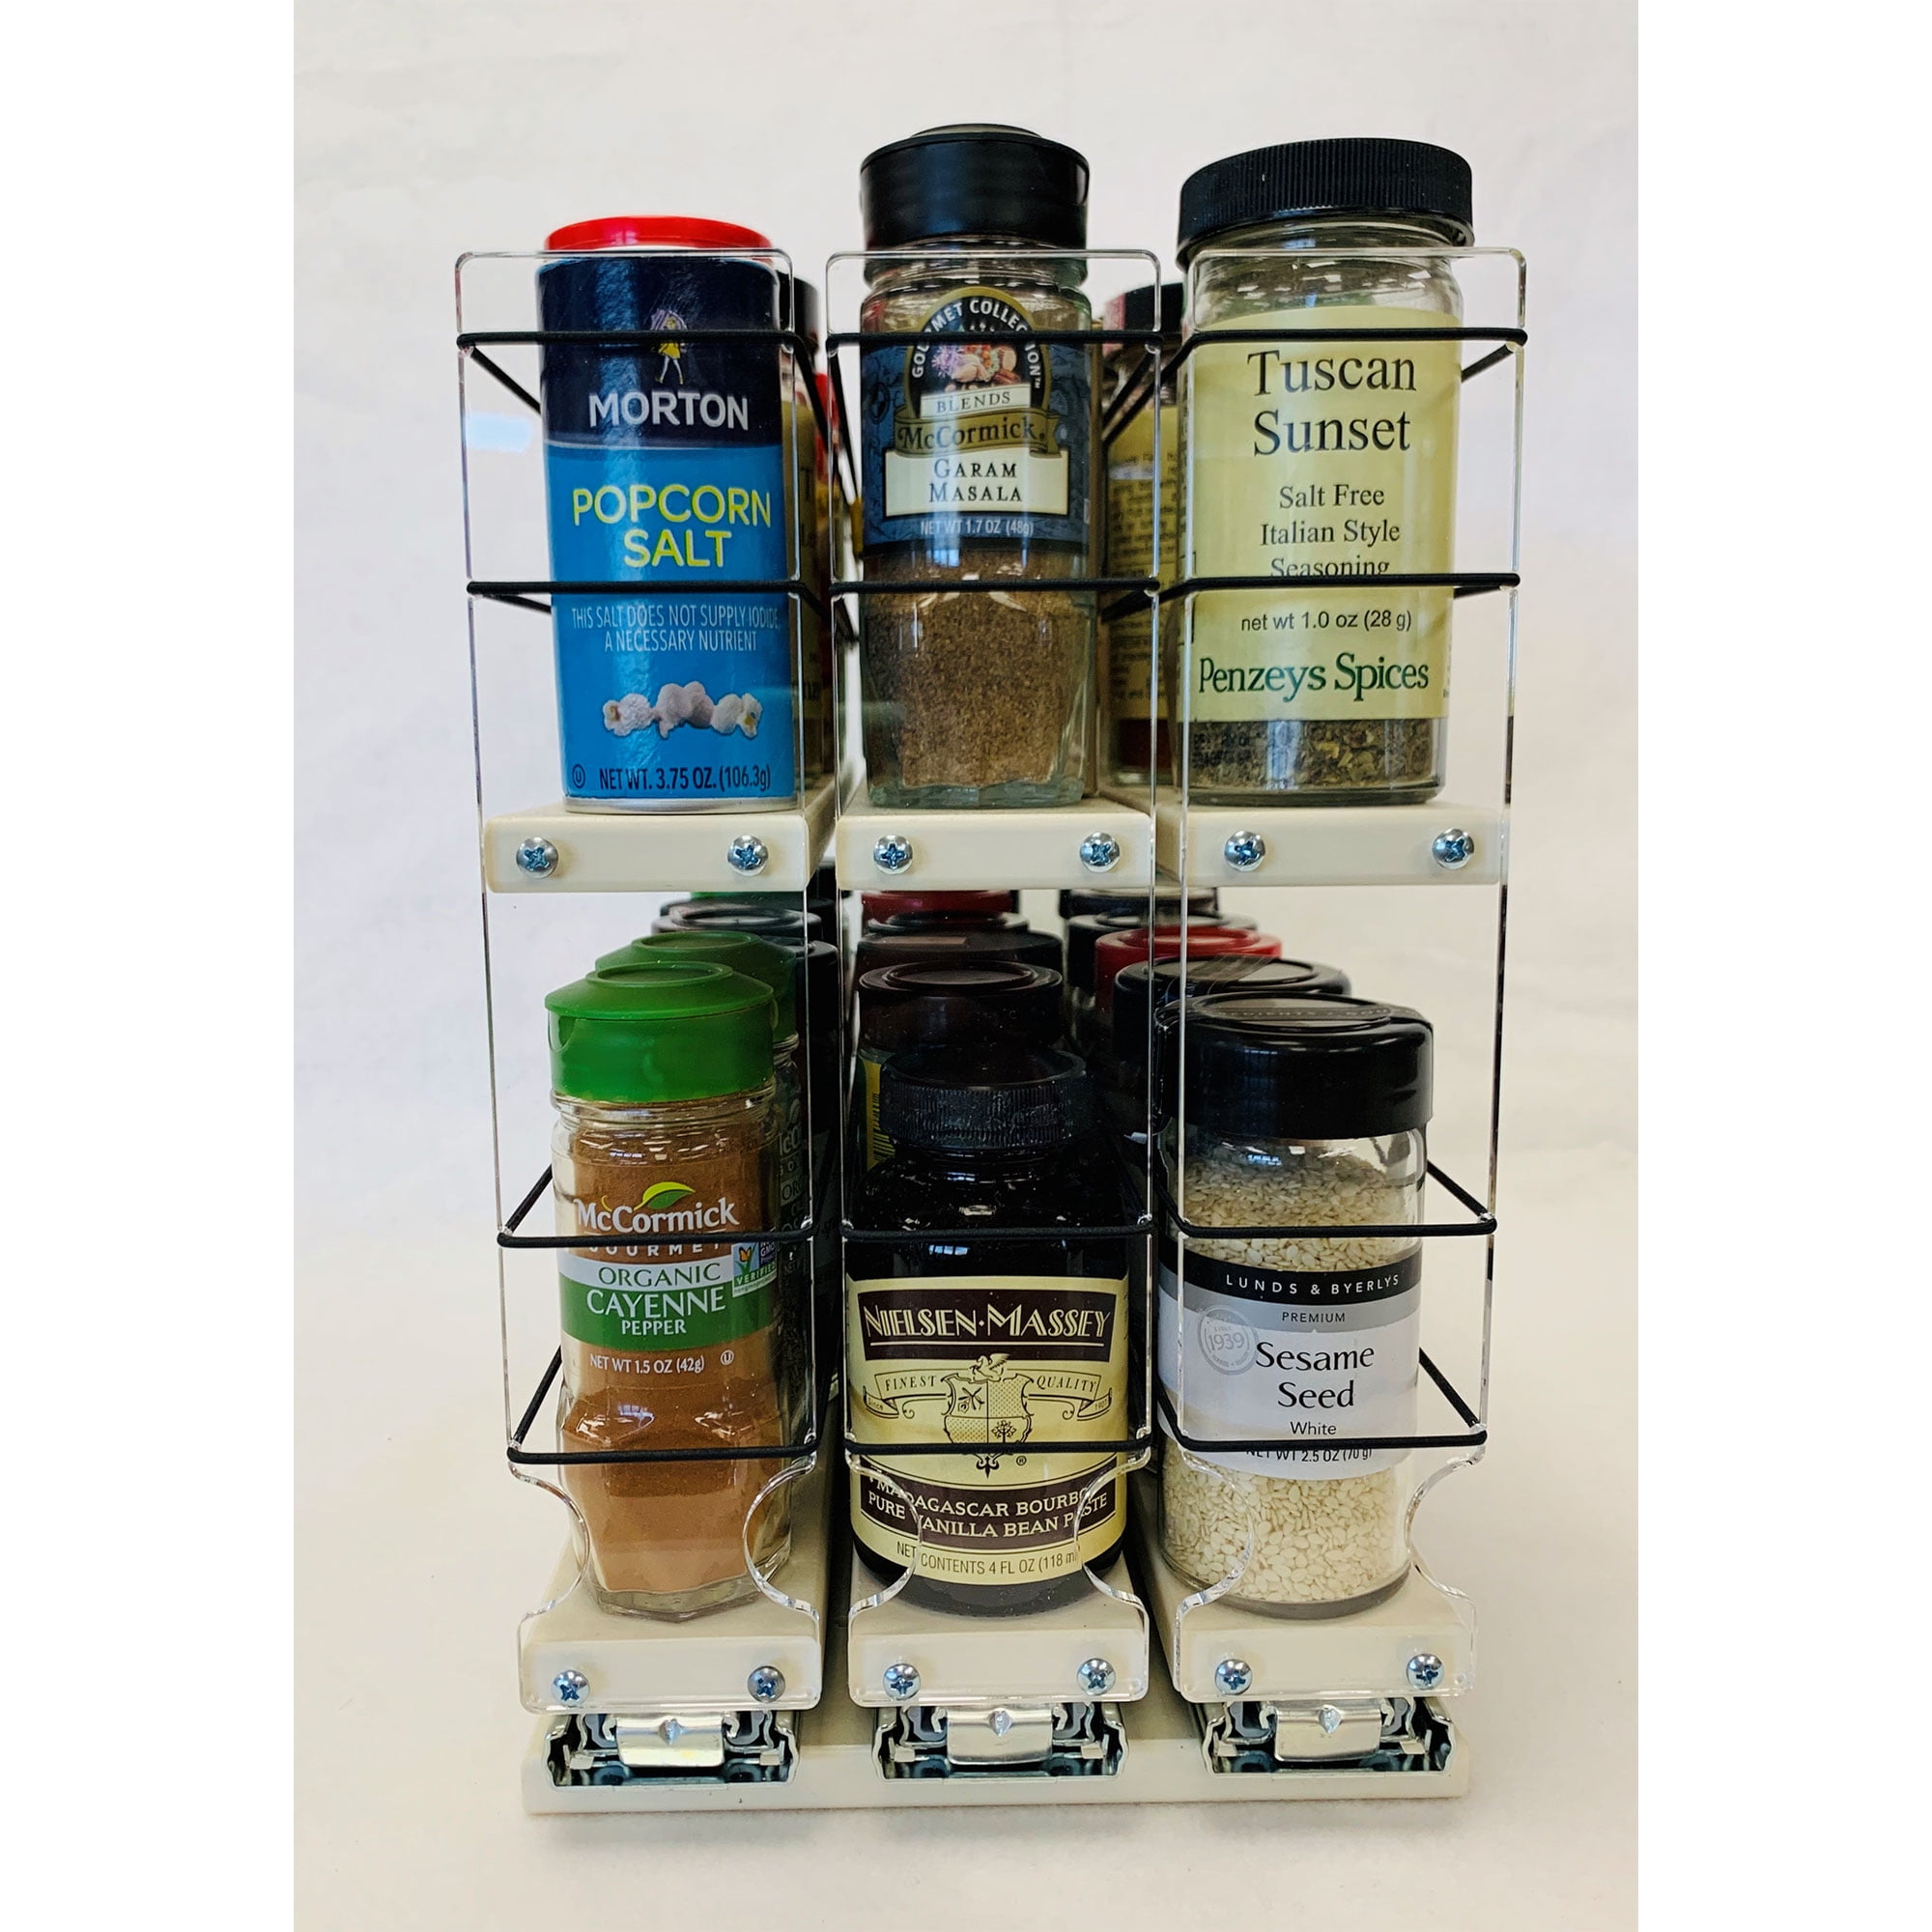  Vertical Spice - Spice Rack Drawer - Pull Out Sliding Cabinet  Spice Organizer - 2 Tier Spice Caddy Shelf - Spice Racks for Inside Cabinets  - Made in USA Kitchen Organizer 